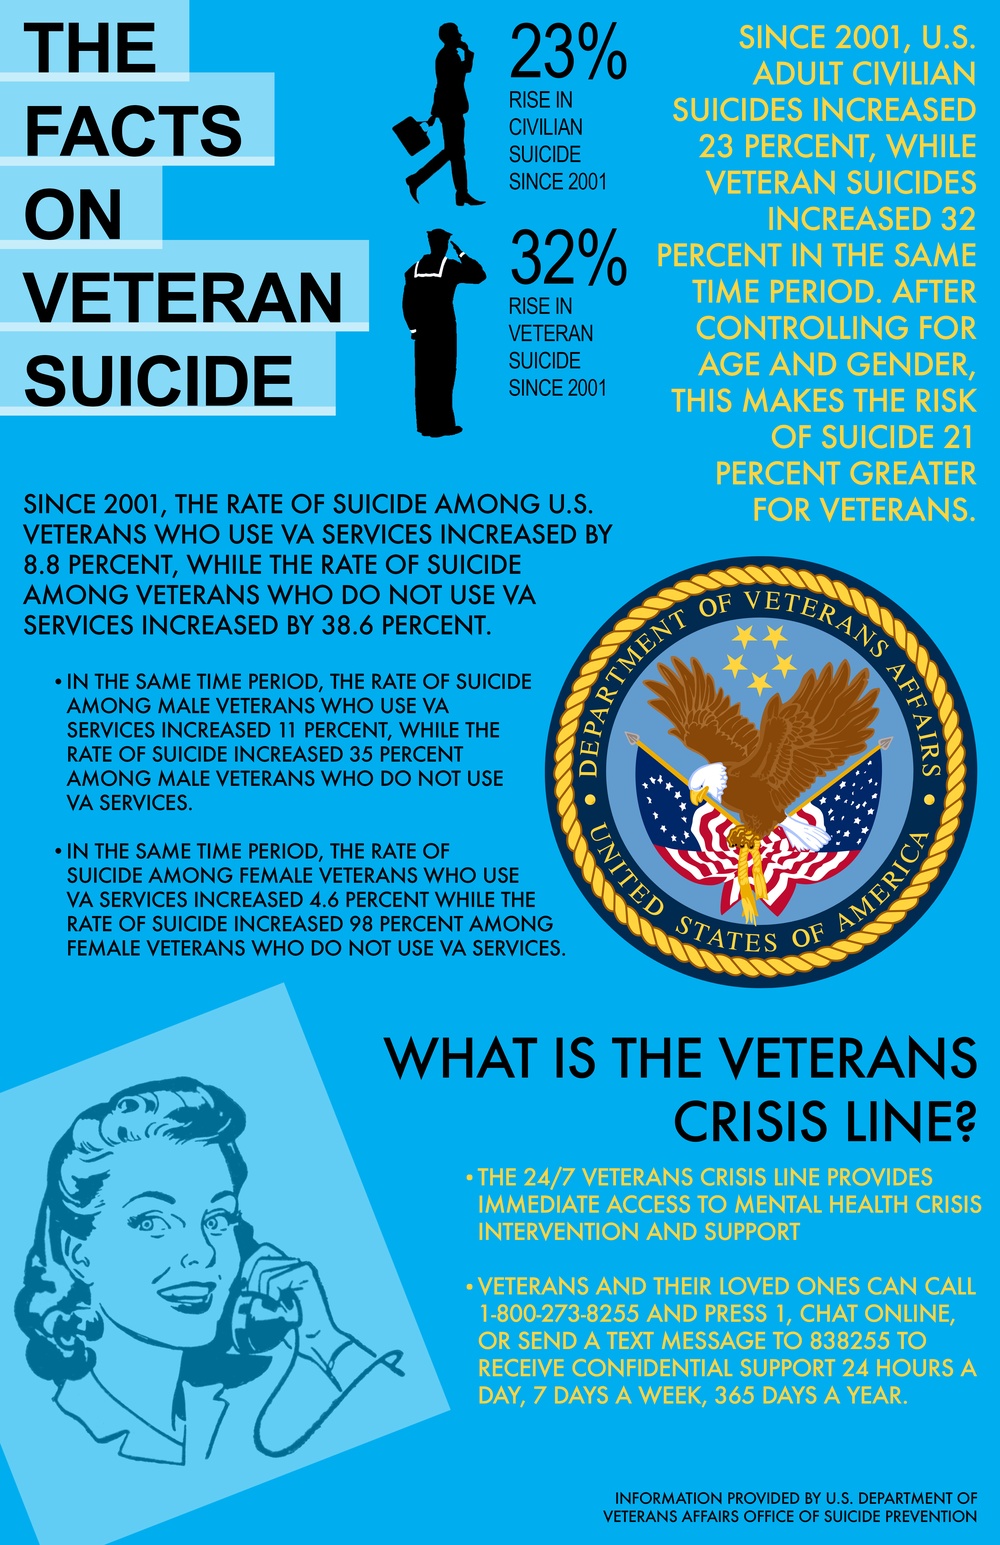 The Facts on Veteran Suicide